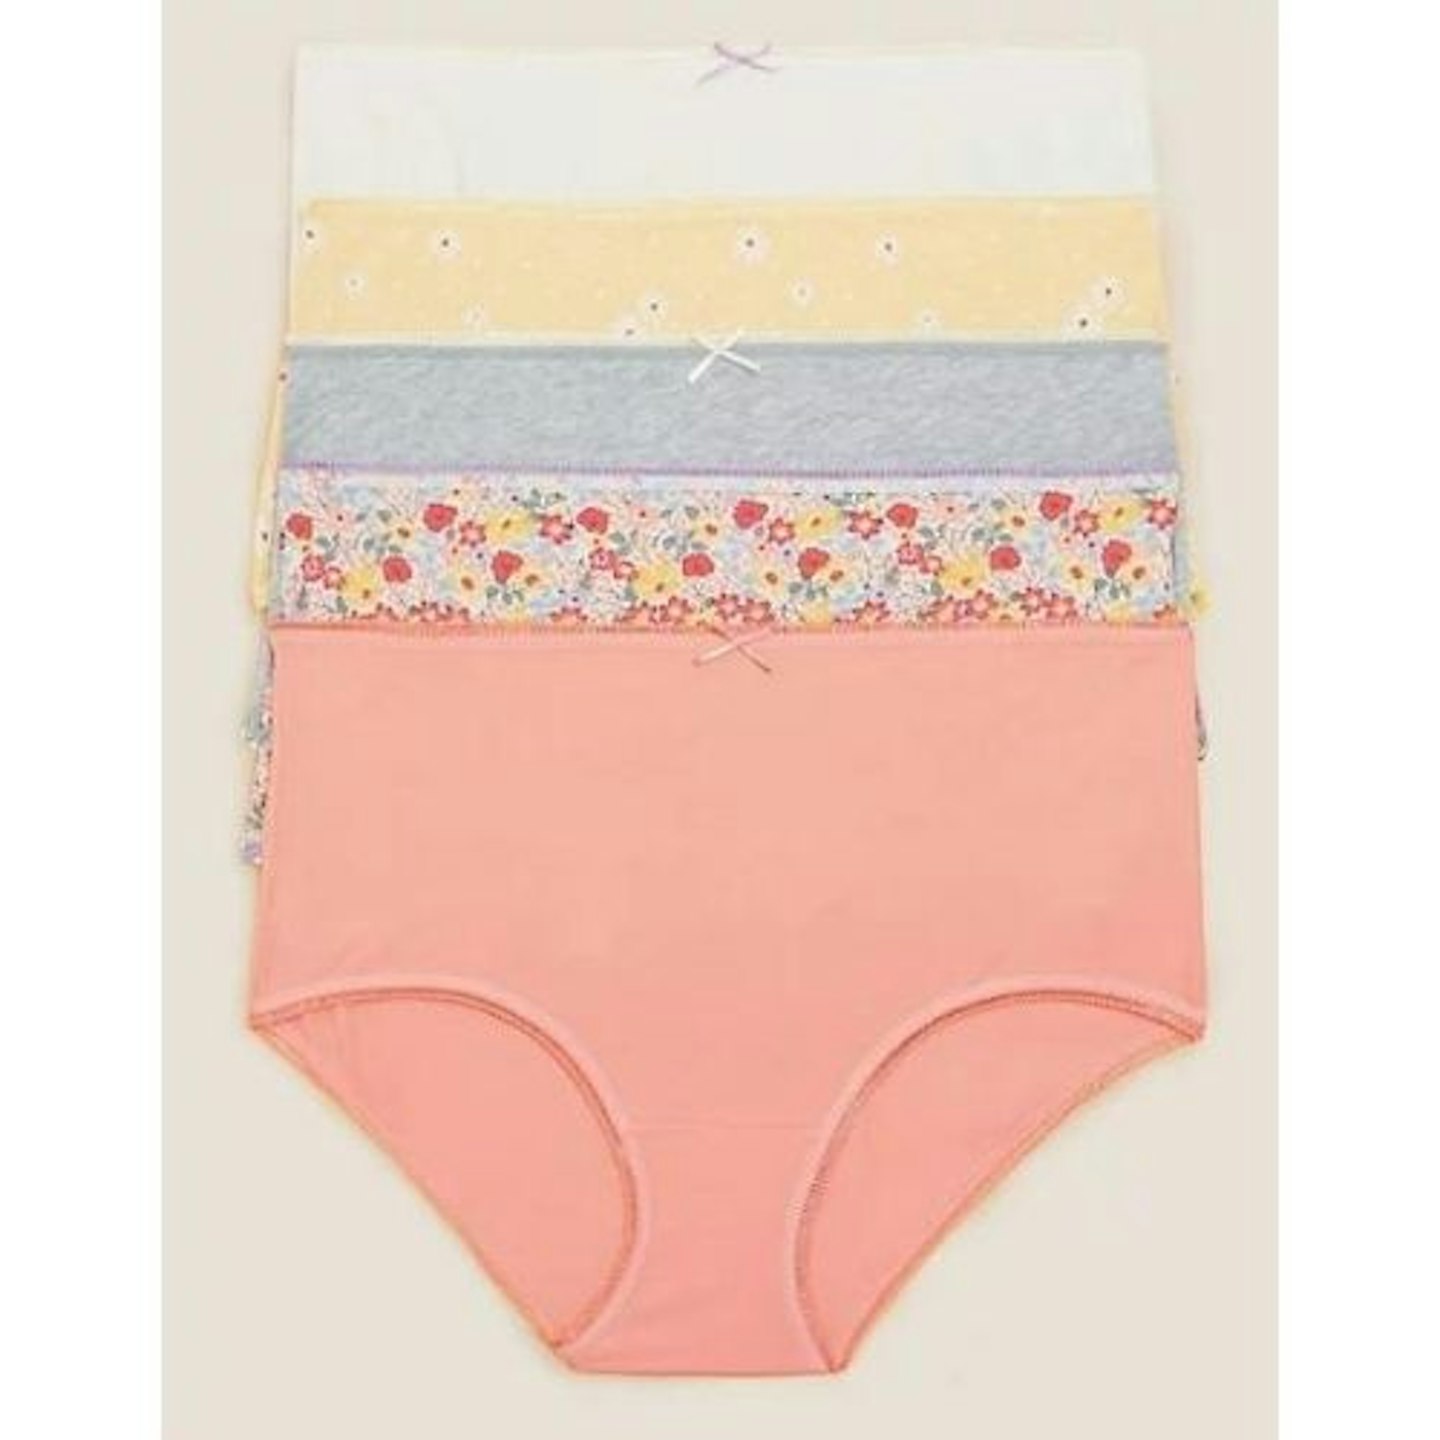 Pack of 10 Ladies Lace Brief Knickers Cotton Rich Underwear. Buy Now For  £14.00.